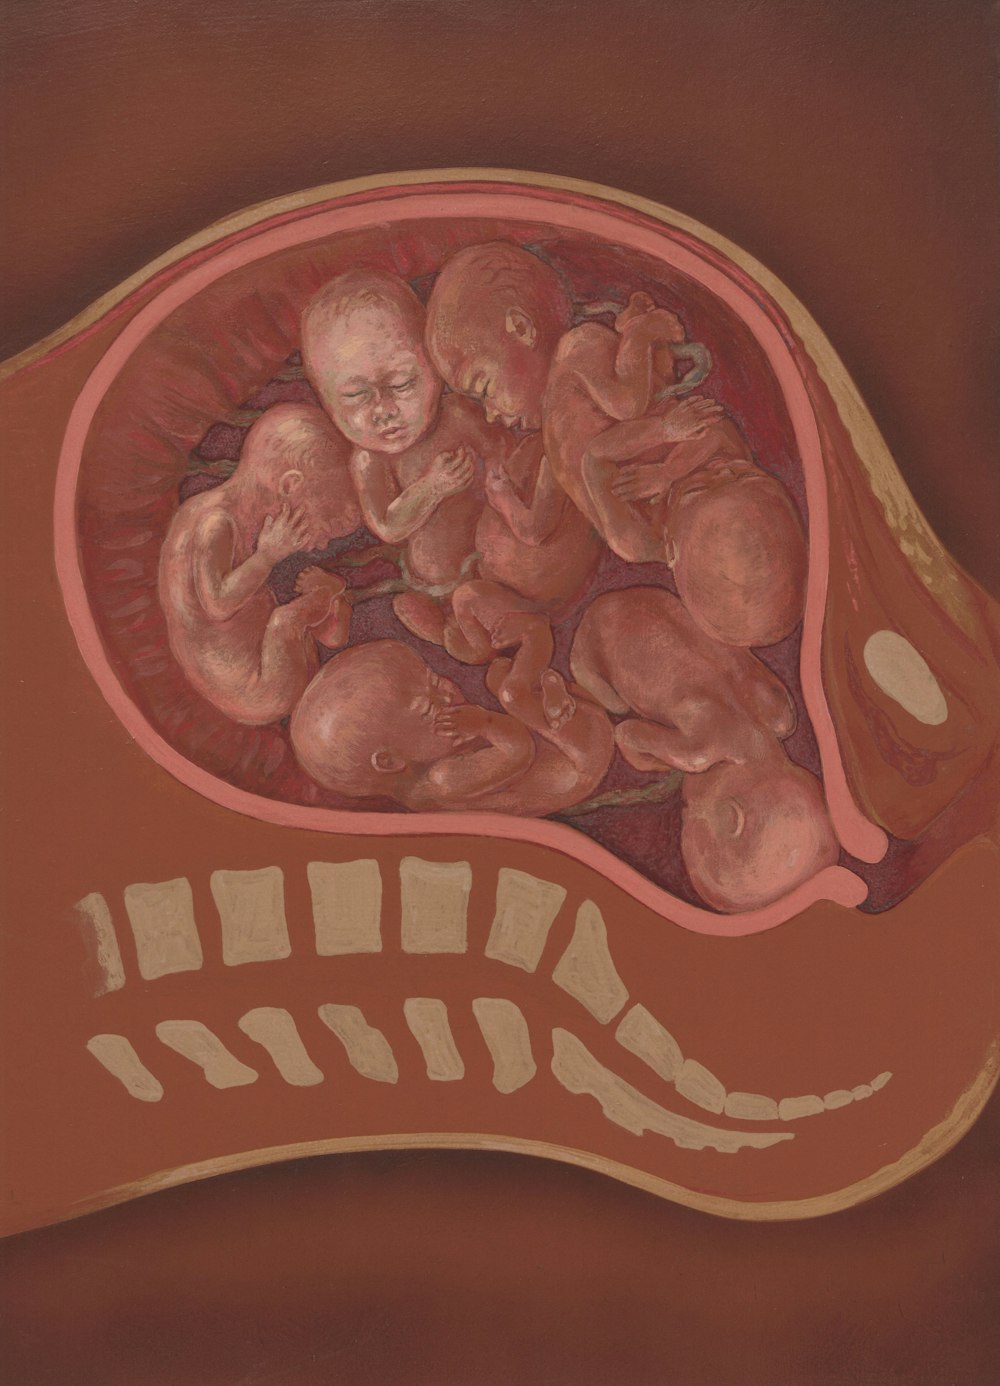 a painting of a human stomach with babies in it